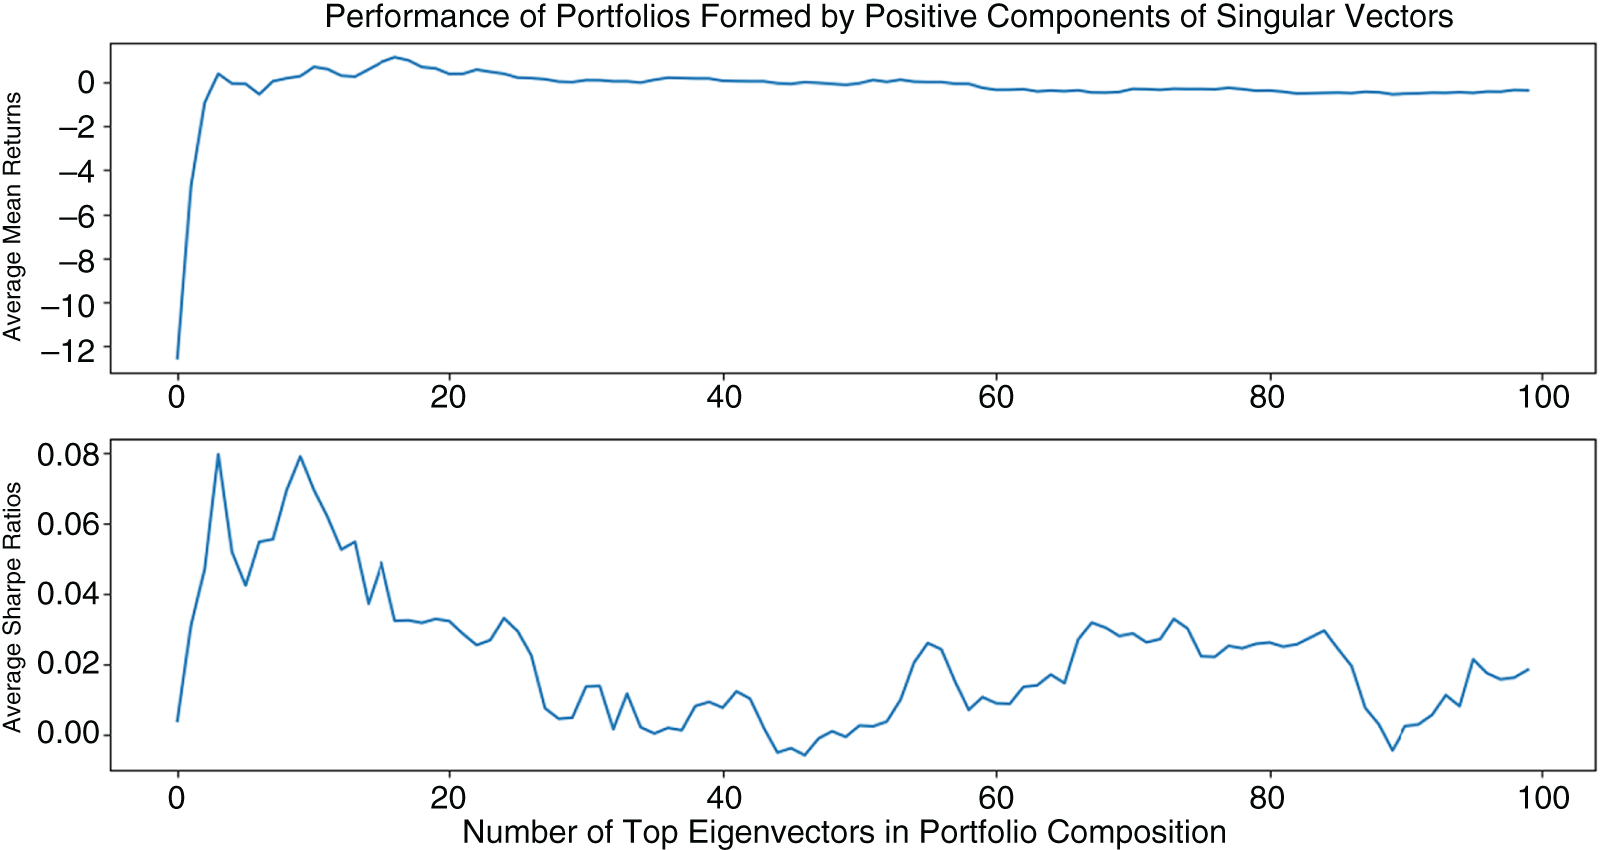 Graphs depict the average performance of 1,000 of positive-only components of 1–50 singular vectors. Portfolios consisting of only positive components around 40 singular vectors outperform as measured by mean Sharpe ratios.